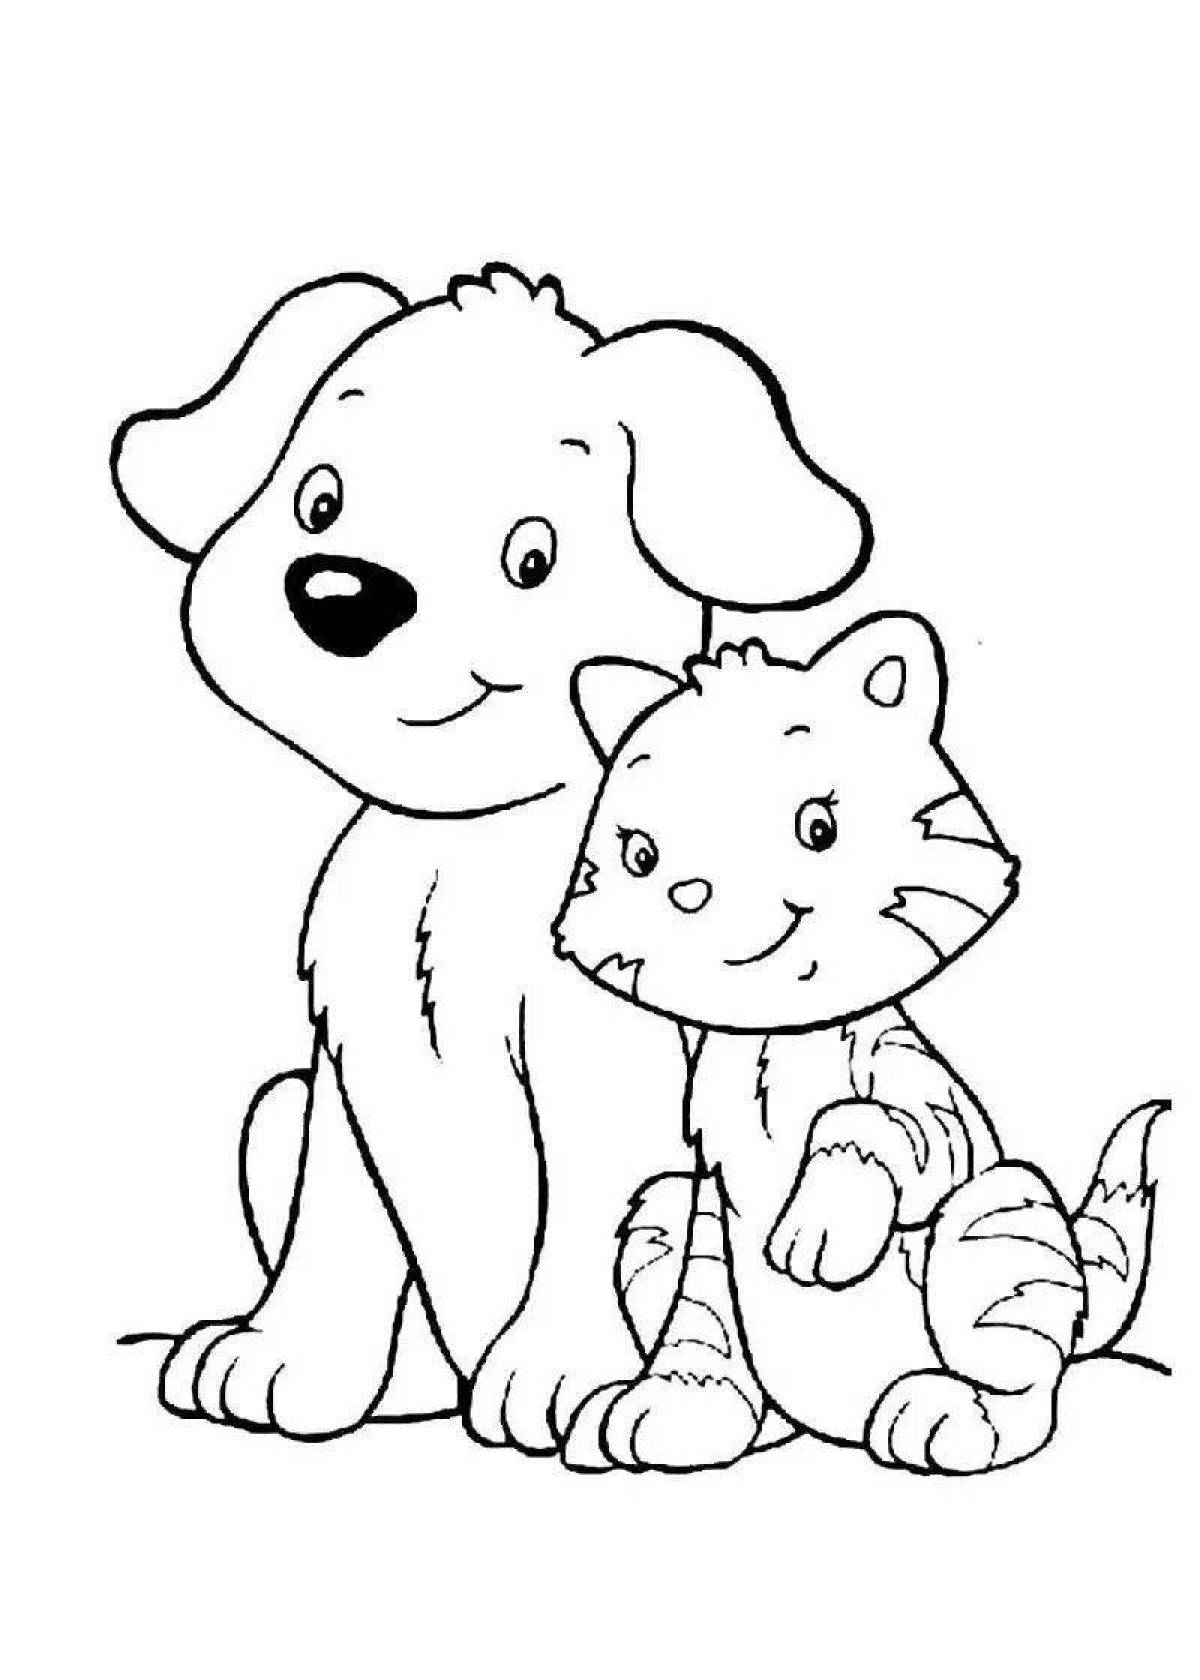 Cat and puppy #8